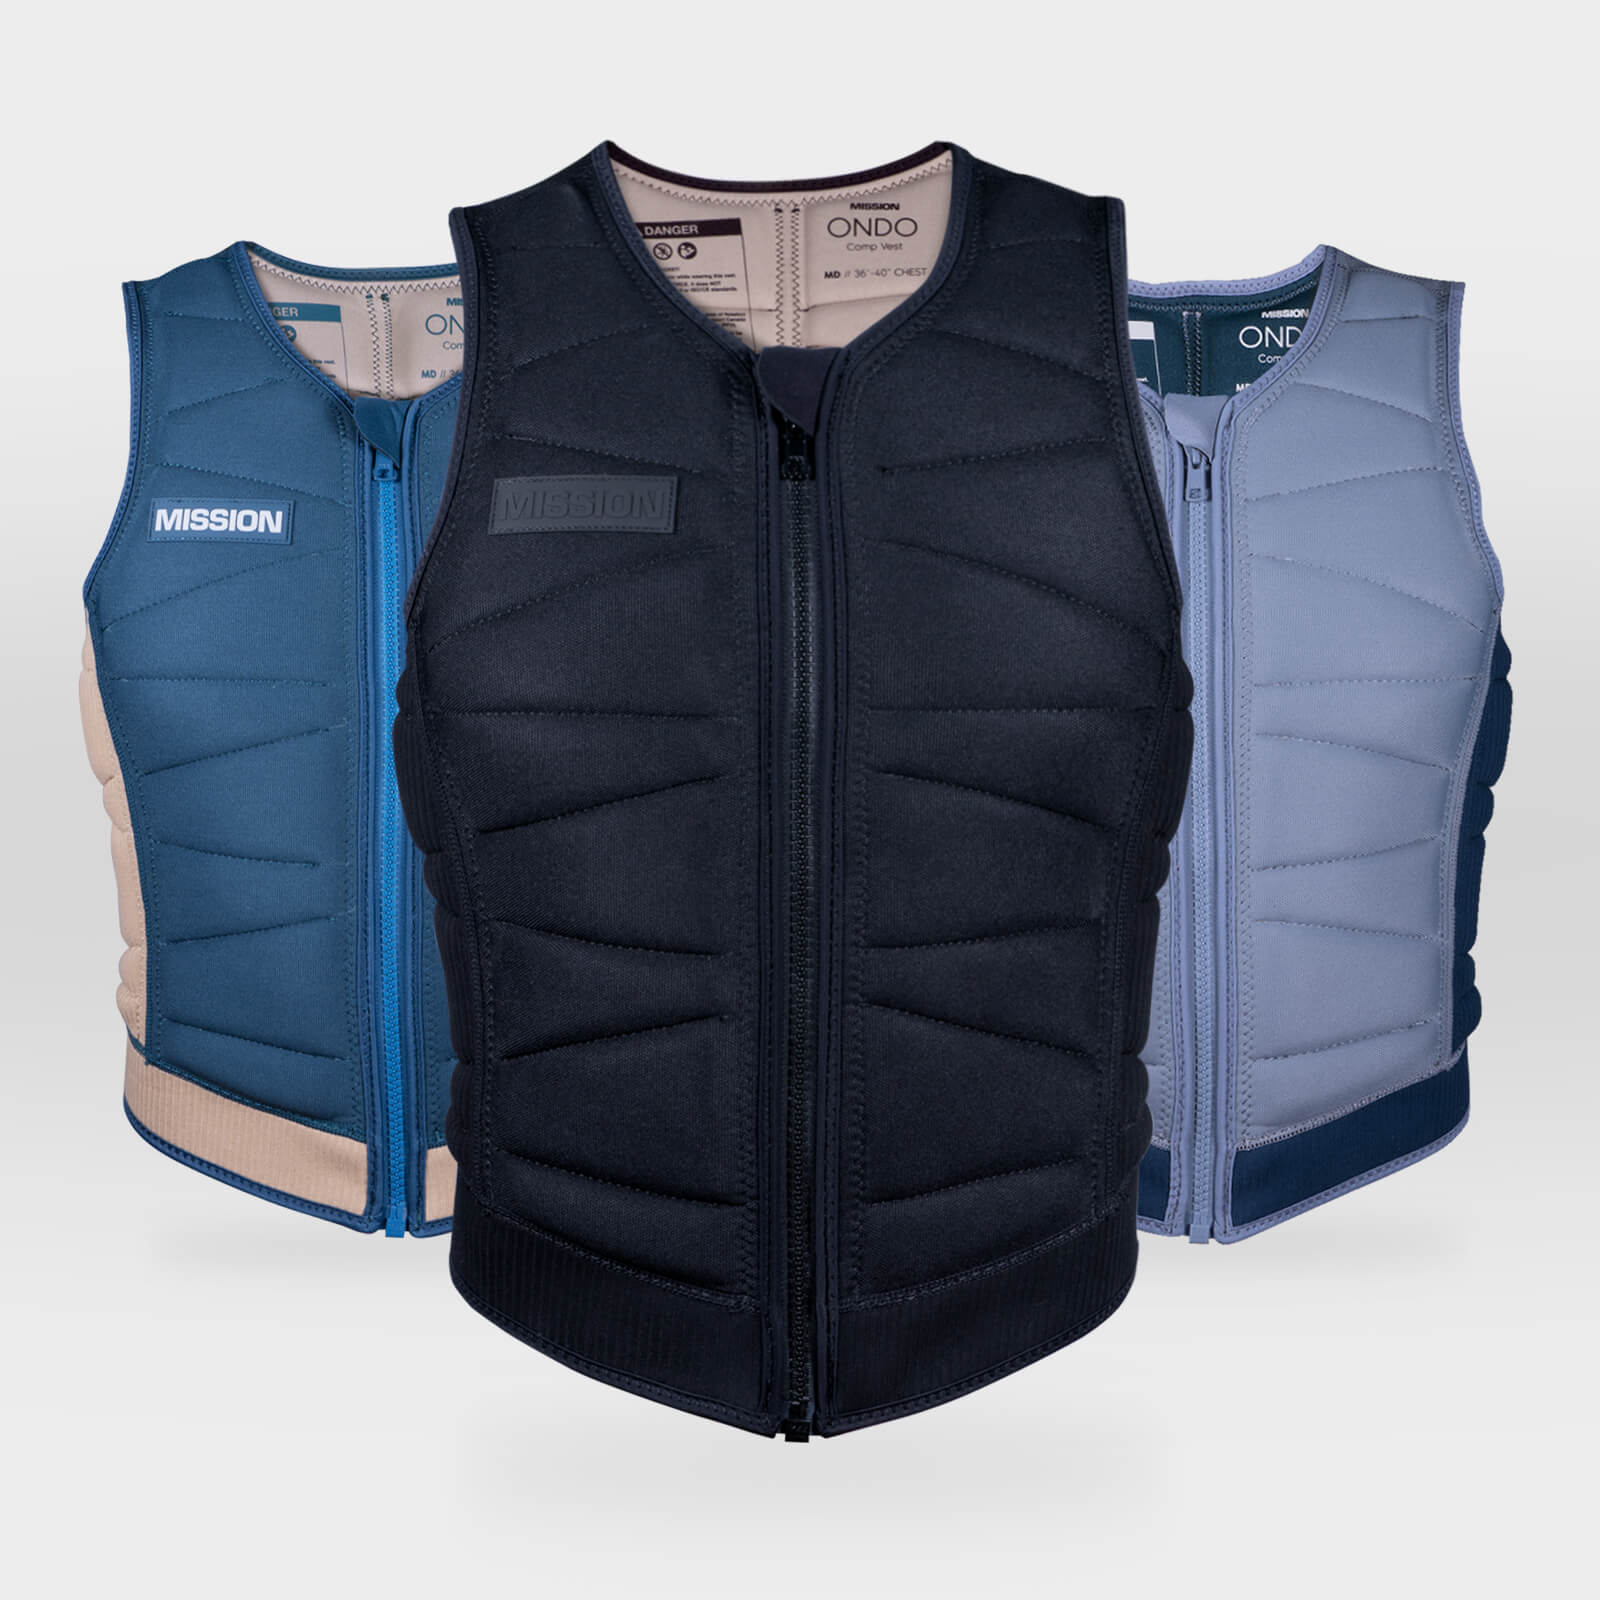 ONDO Comp & Impact Life Vest for Wakesurfing & Wakeboarding | MISSION